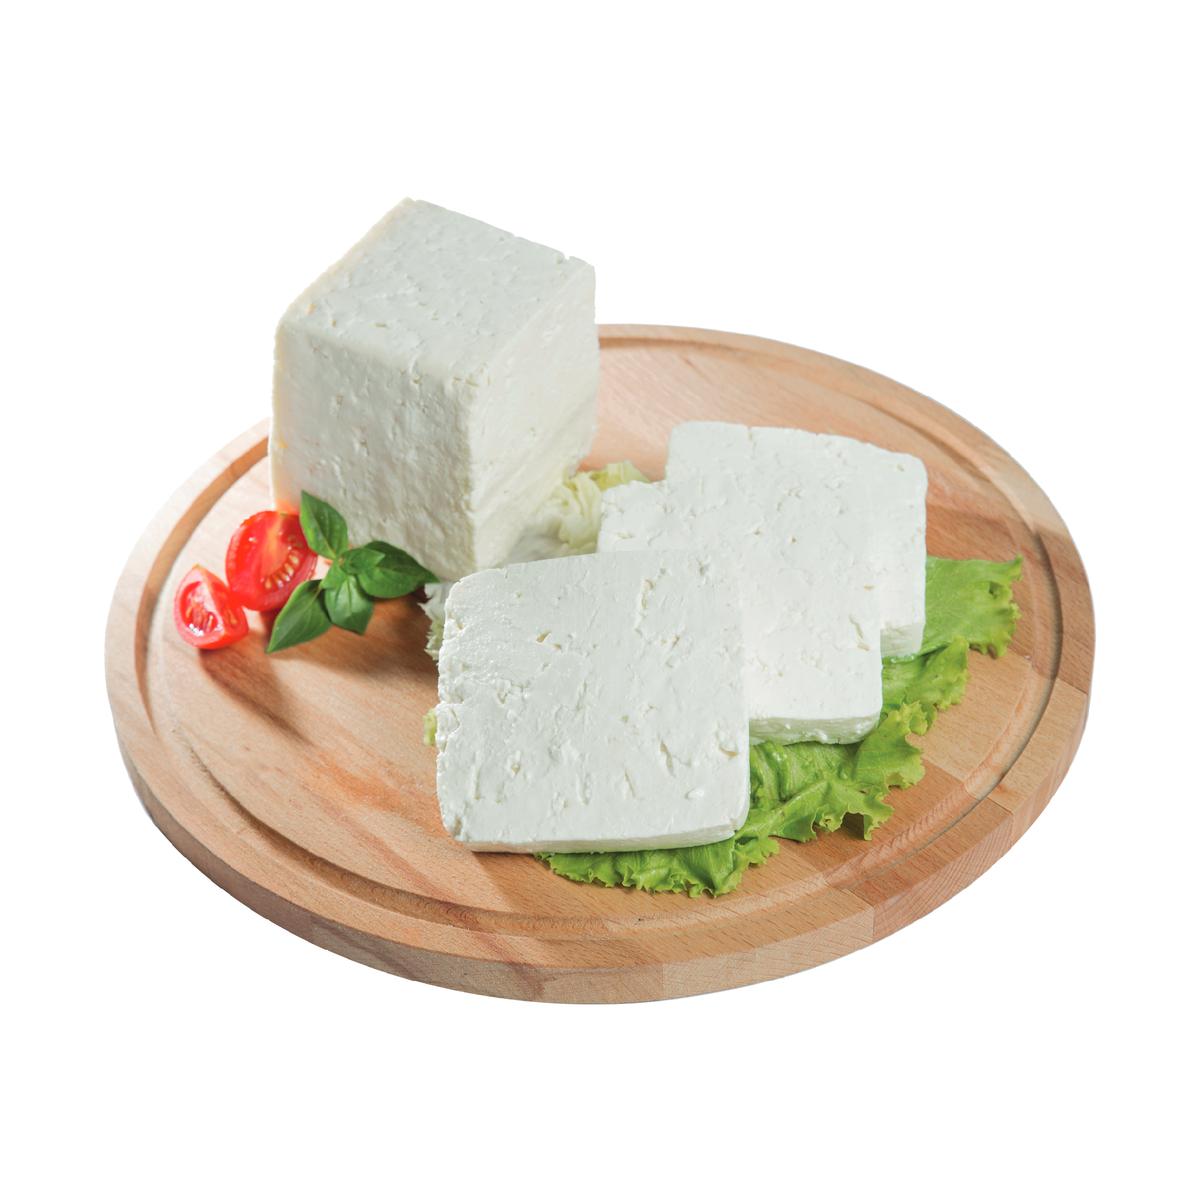 Egyptian Alexandria Cheese 250g Approx. Weight